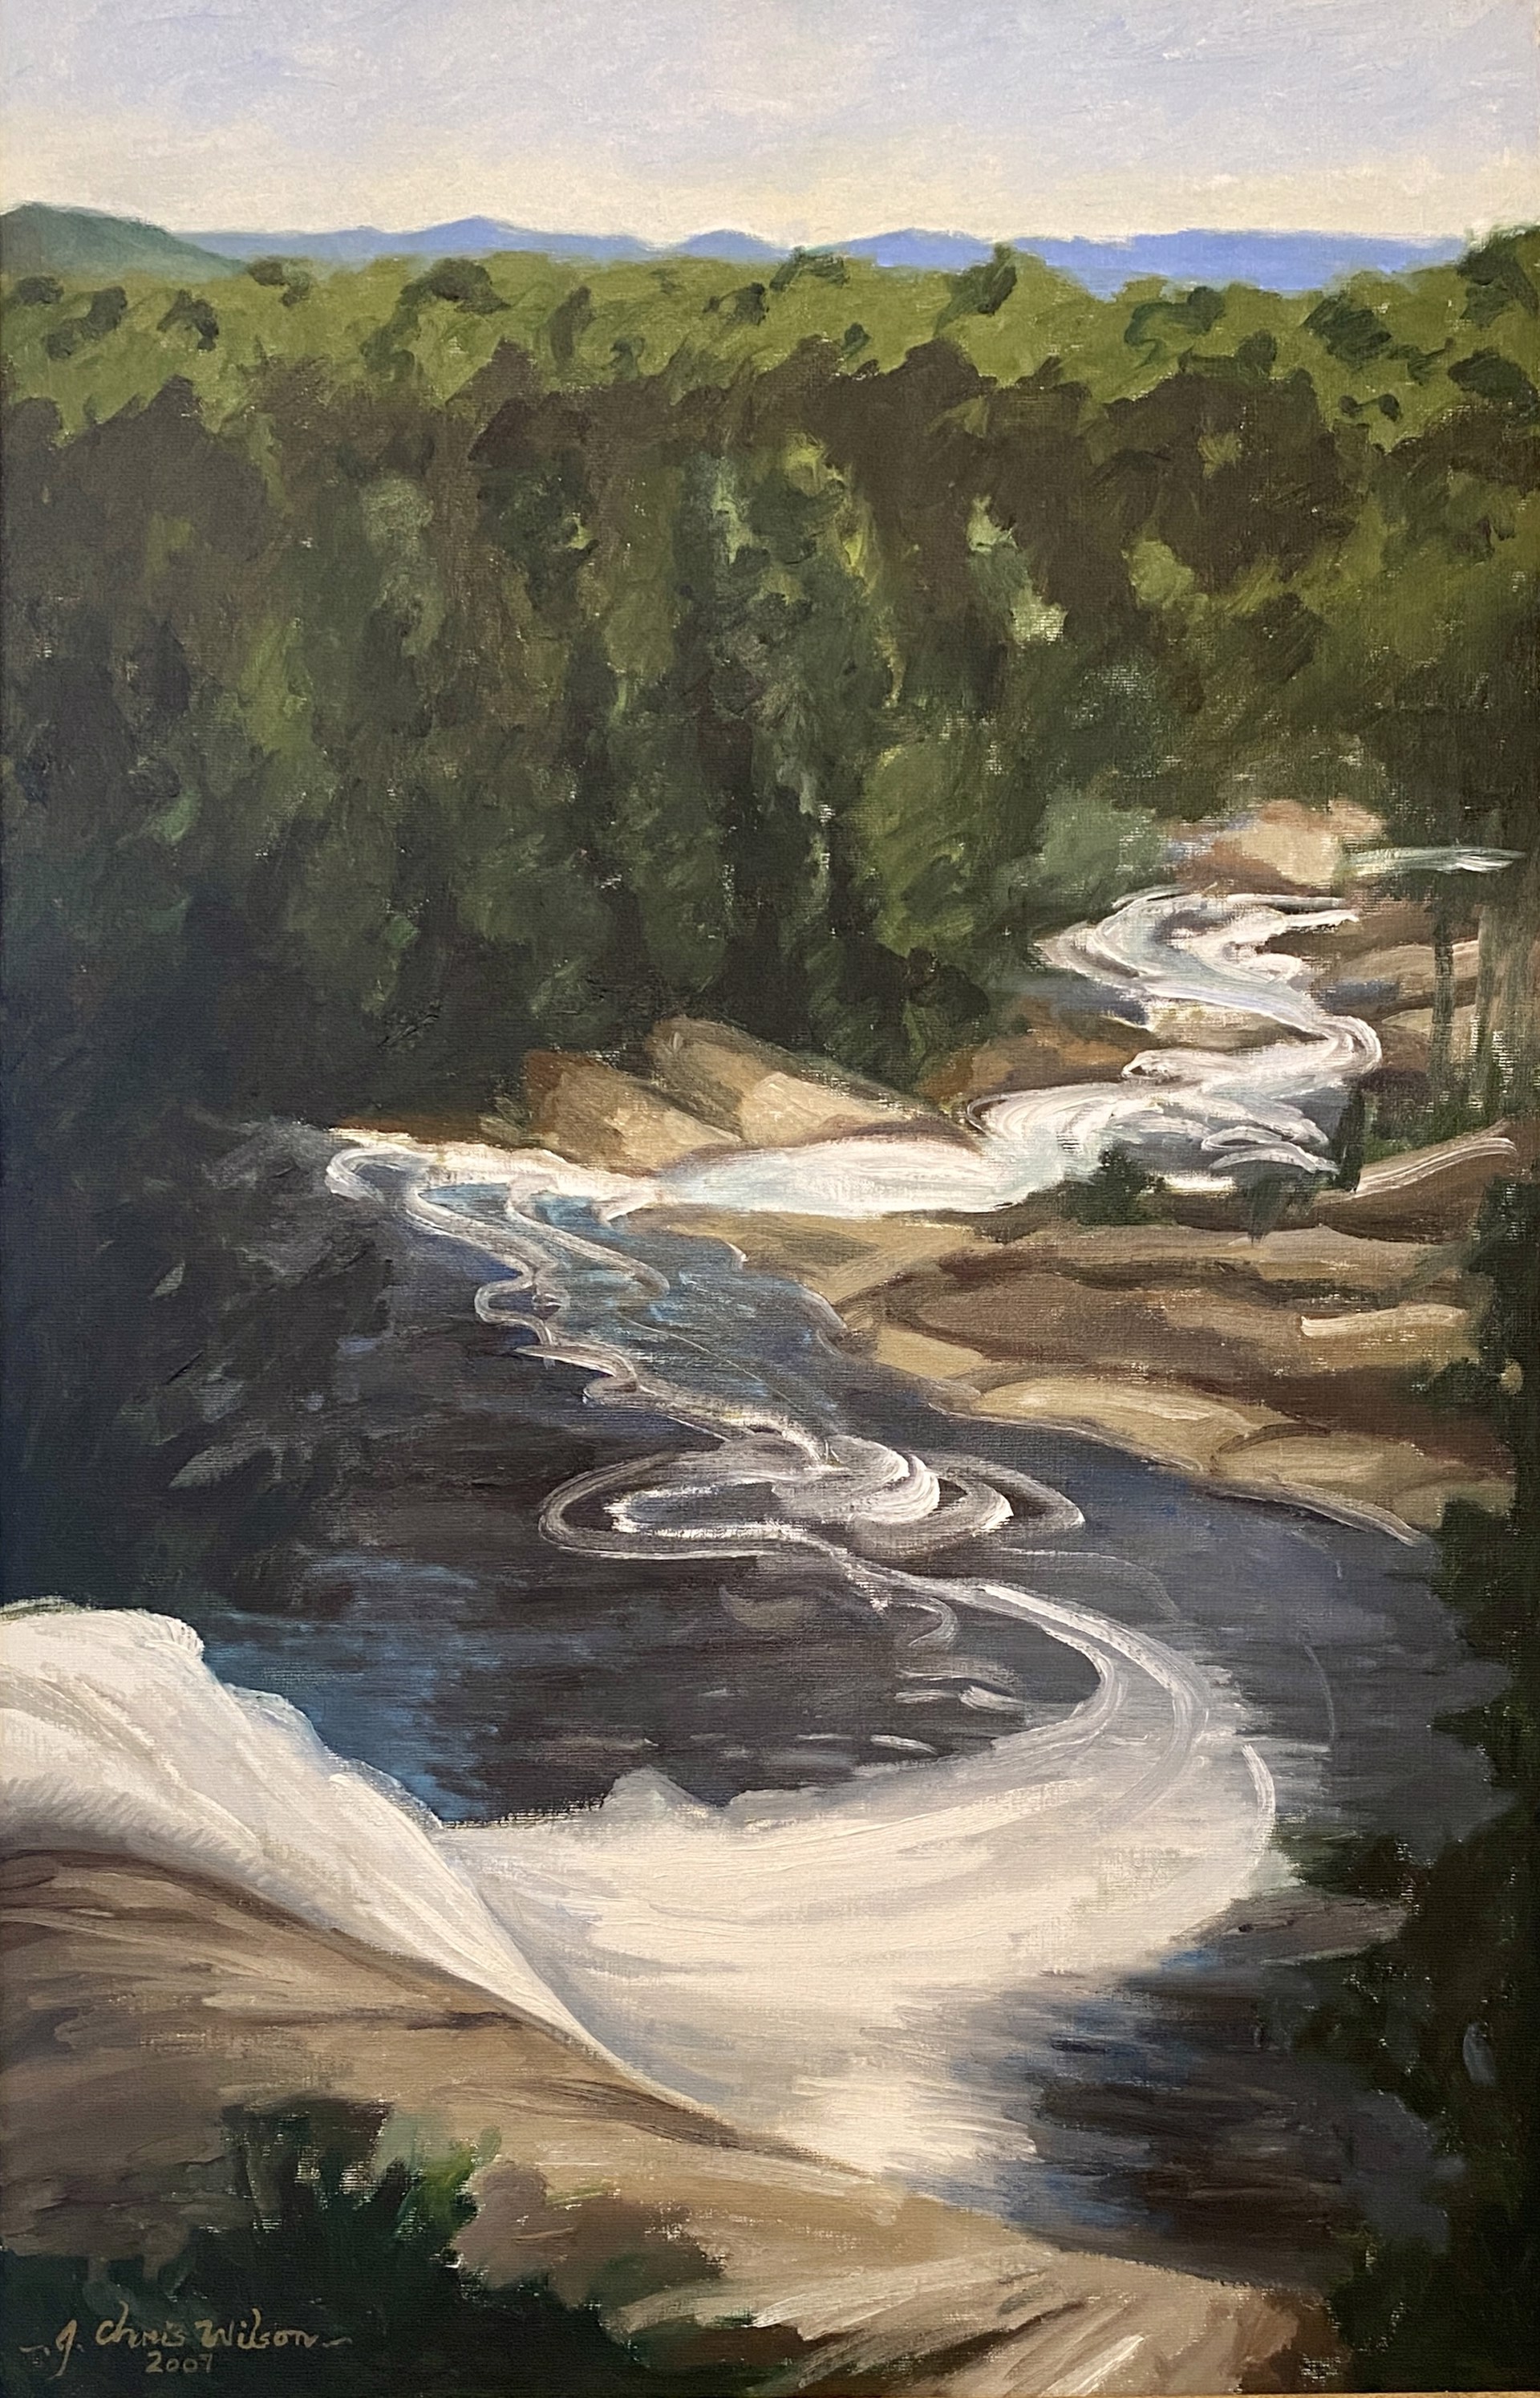 Study Looking Down from Toxaway Falls by J. Chris Wilson